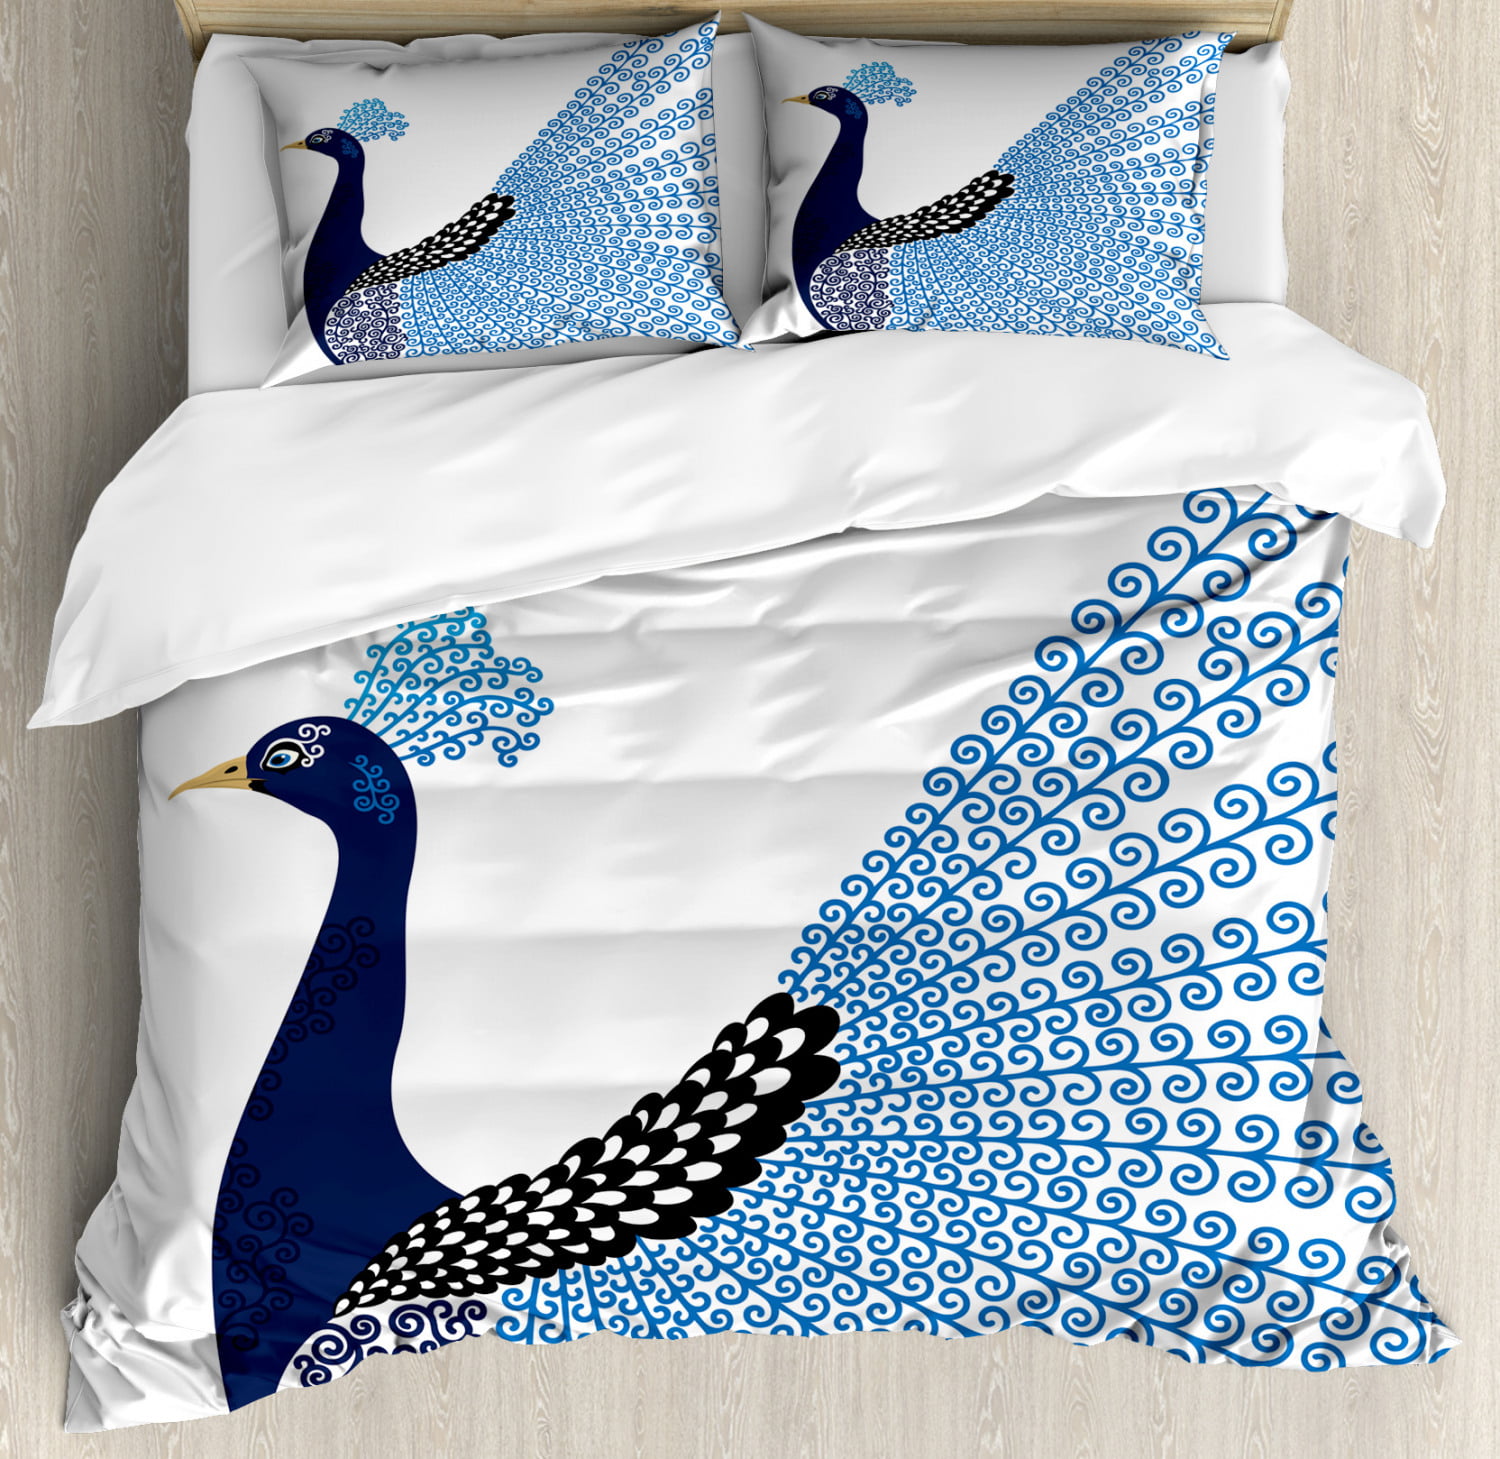 Feathers of Exotic Bird Print Peacock Quilted Bedspread /& Pillow Shams Set